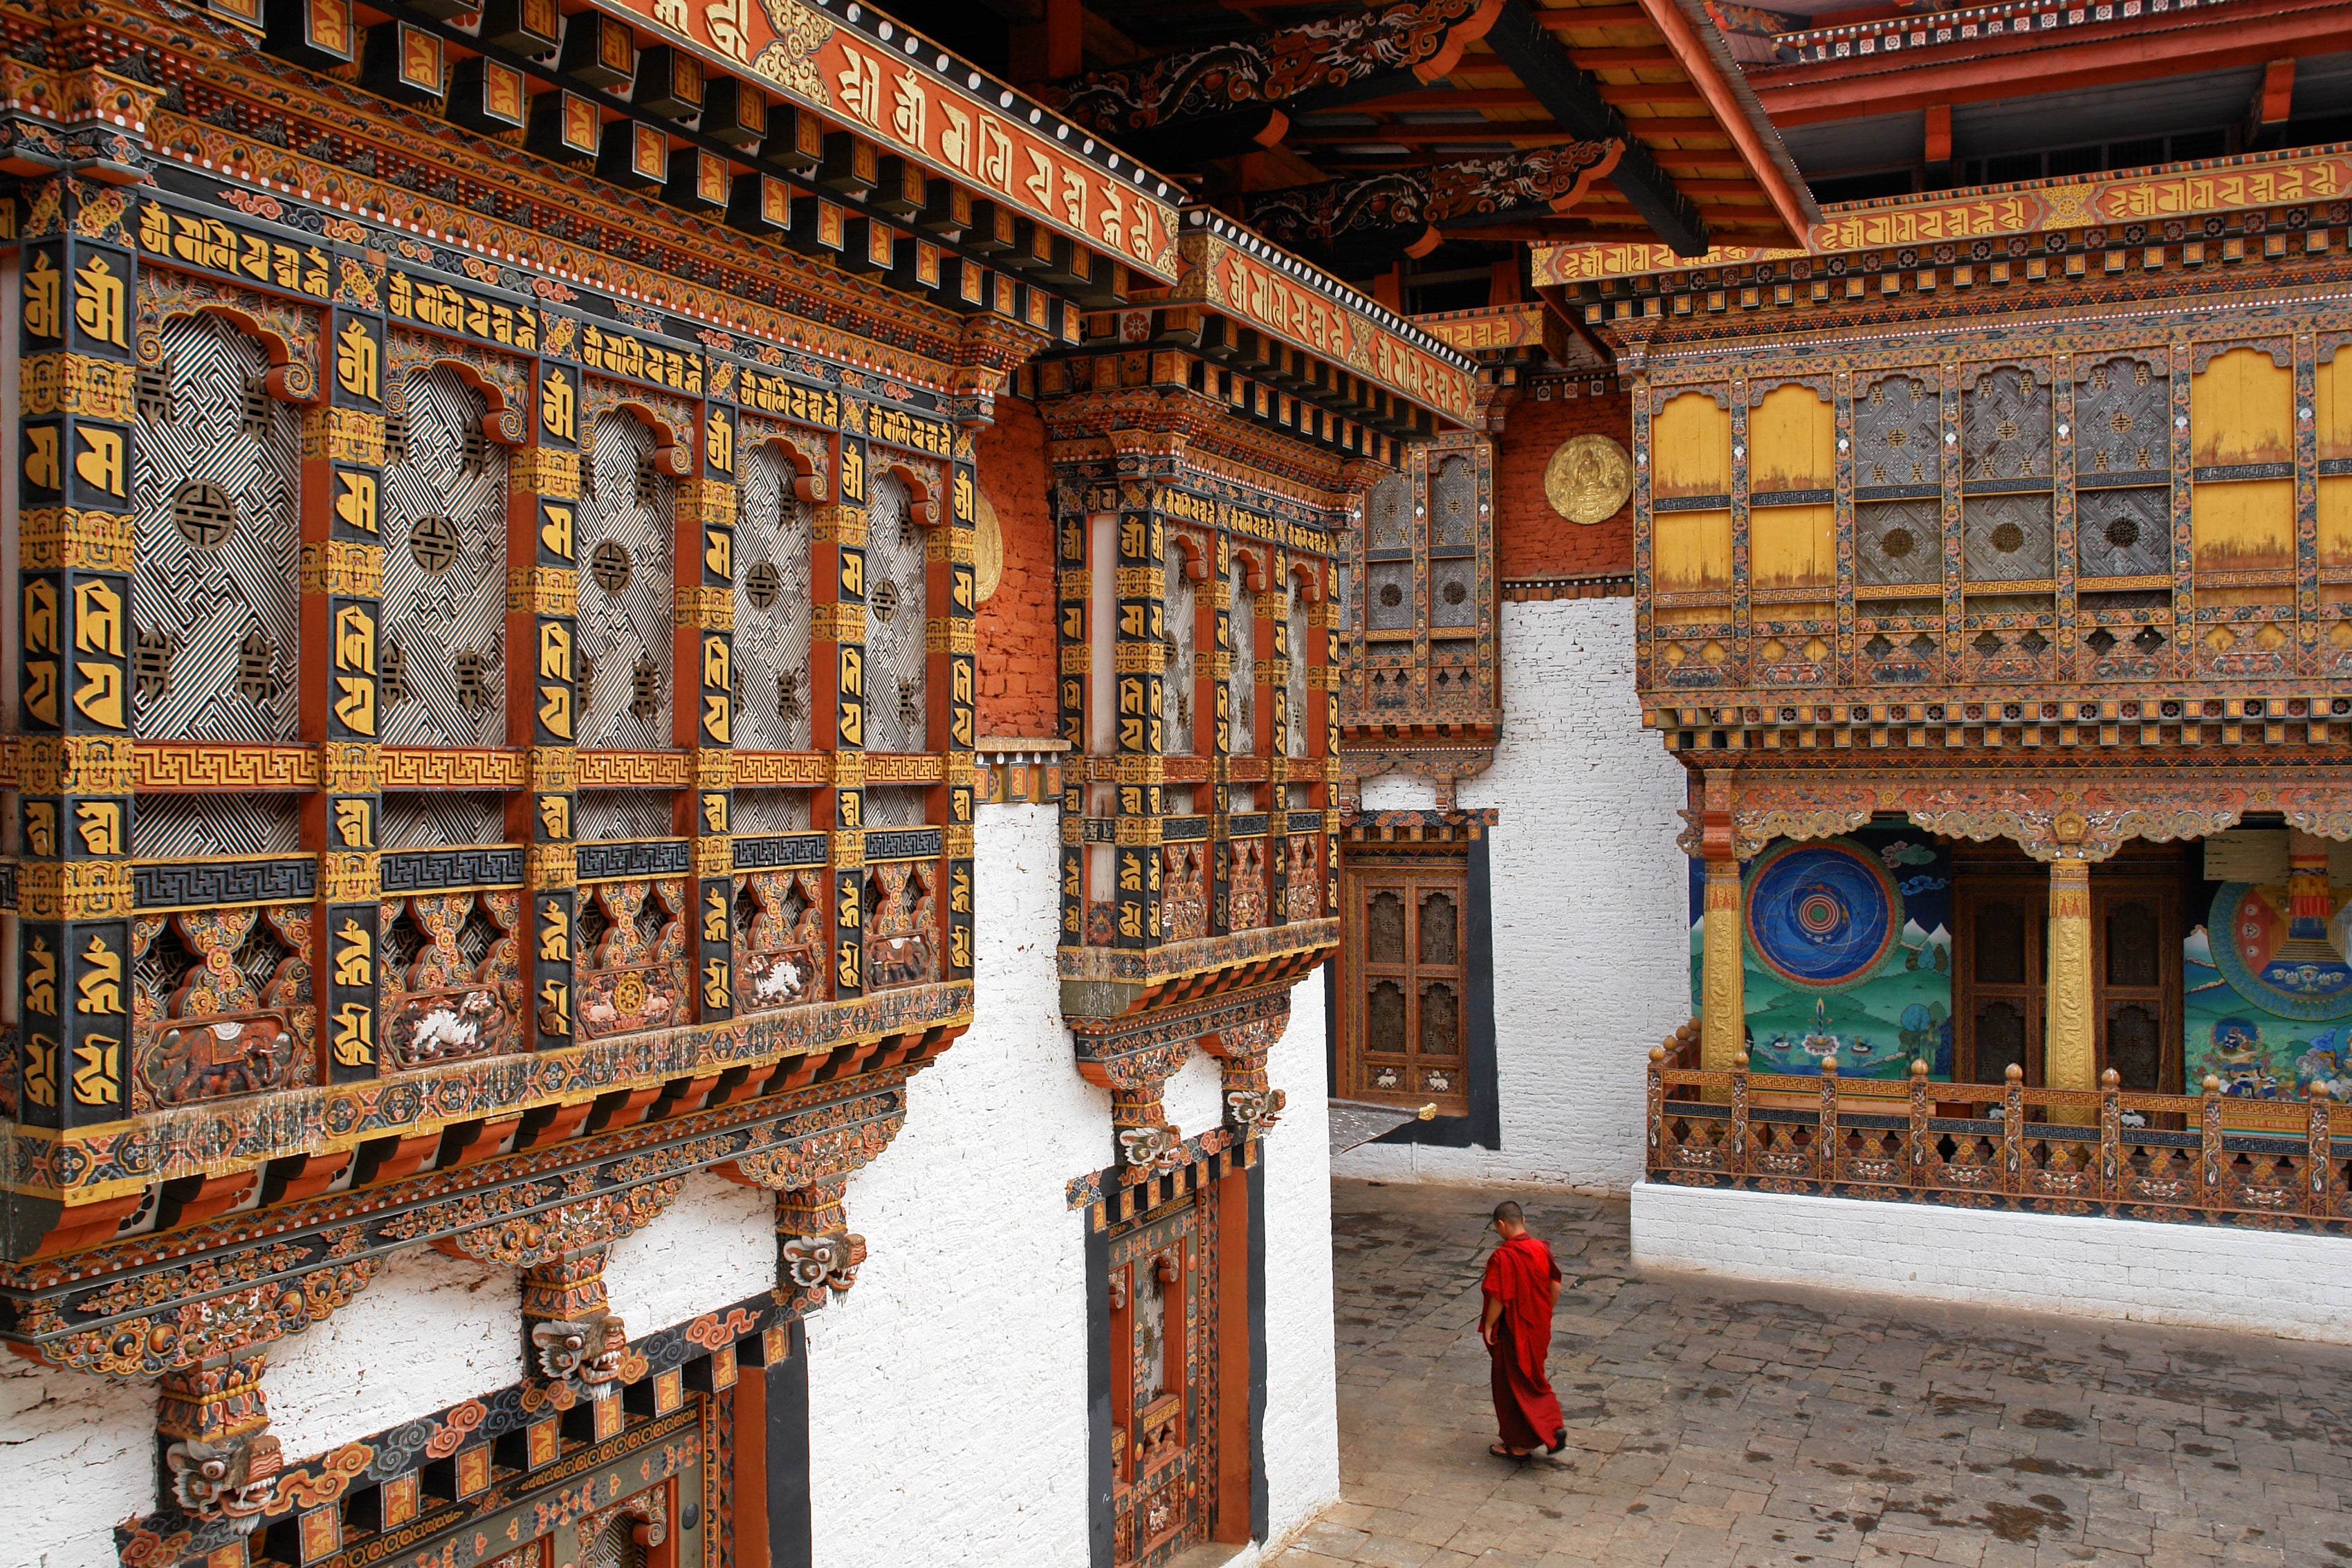 Bhutan’s Buddhist temples and serene landscapes beg to be explored